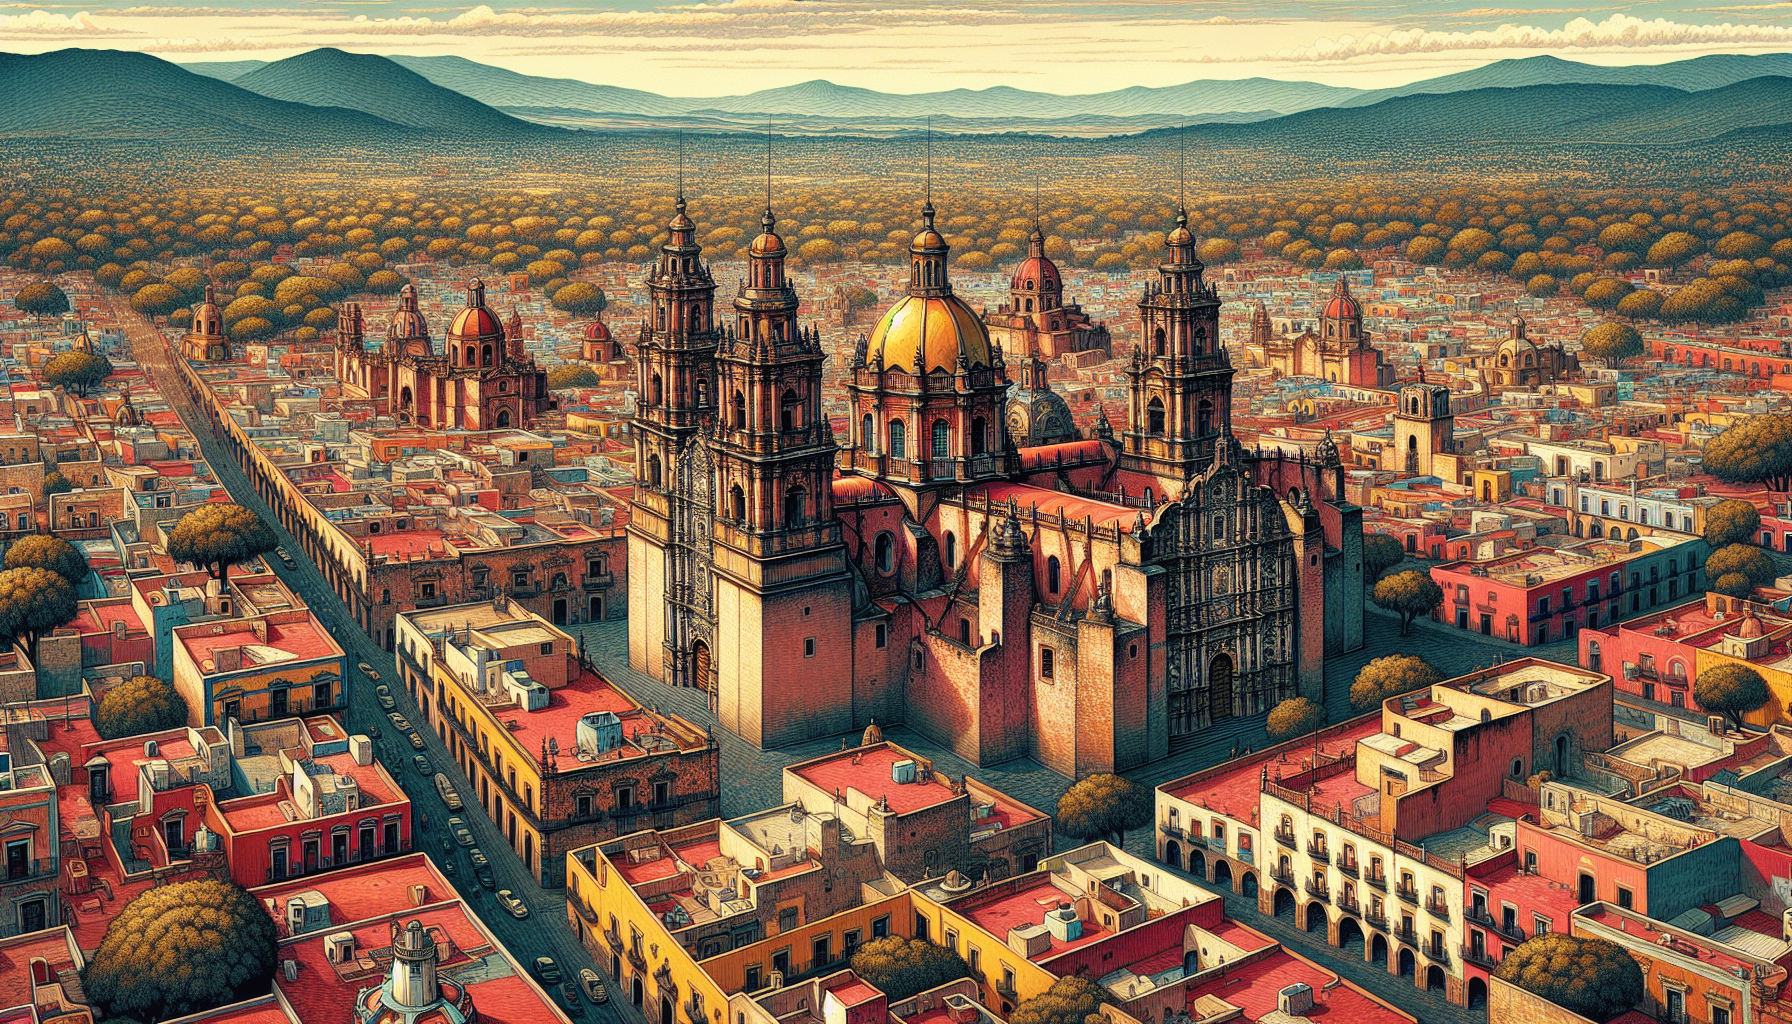 Create an image of a beautiful, detailed aerial view of the historic city of Morelia in Mexico, showcasing its stunning churches and colonial architecture. Show the iconic Cathedral of Morelia standin